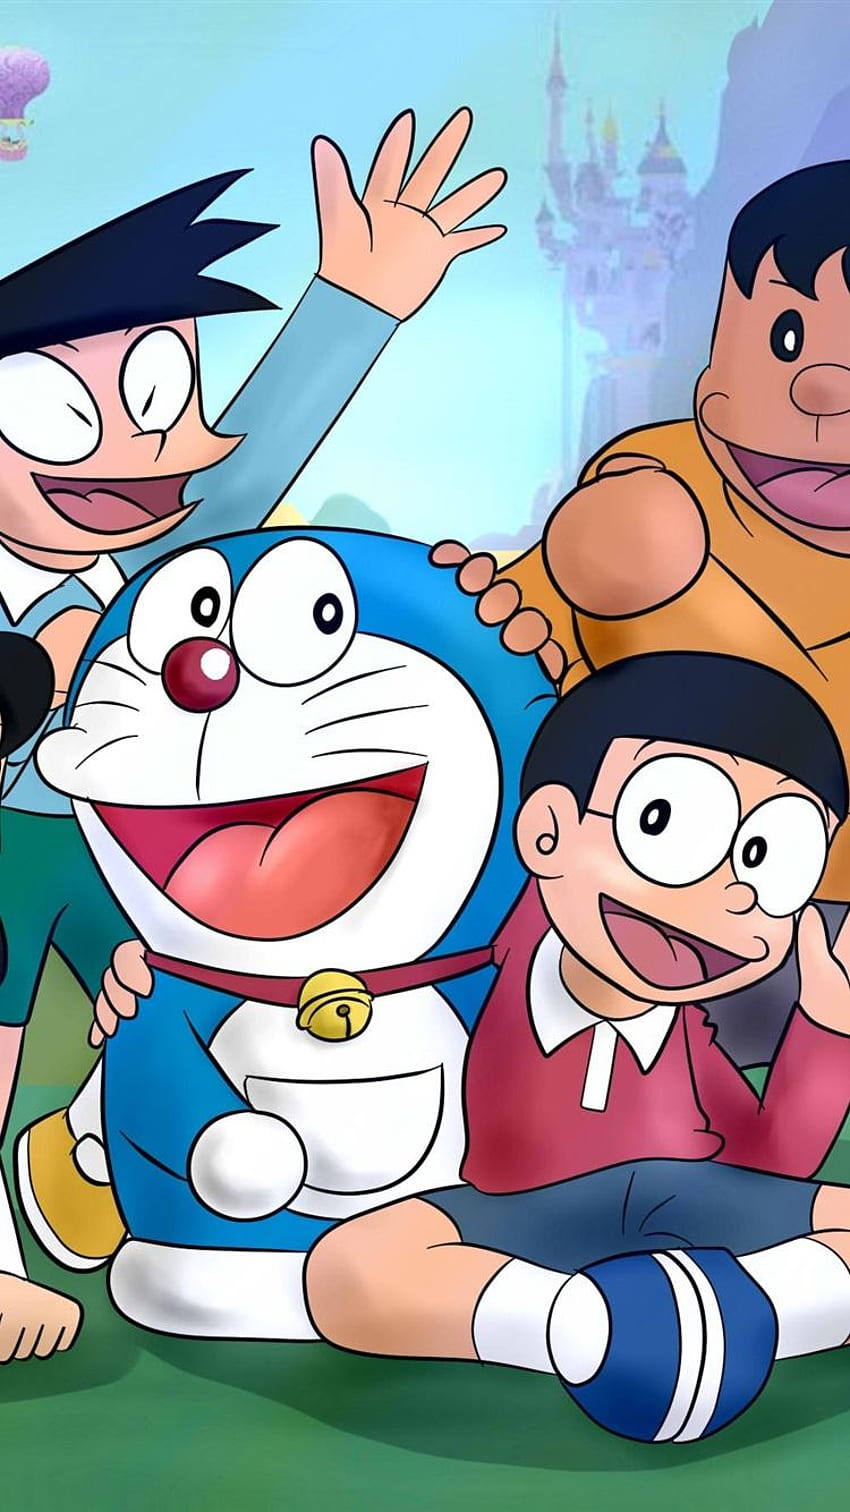 Stand By Me Doraemon Movie HD Widescreen Wallpaper.. #1080P #wallpaper # hdwallpaper #desktop | Doraemon, Hình nền, Anime